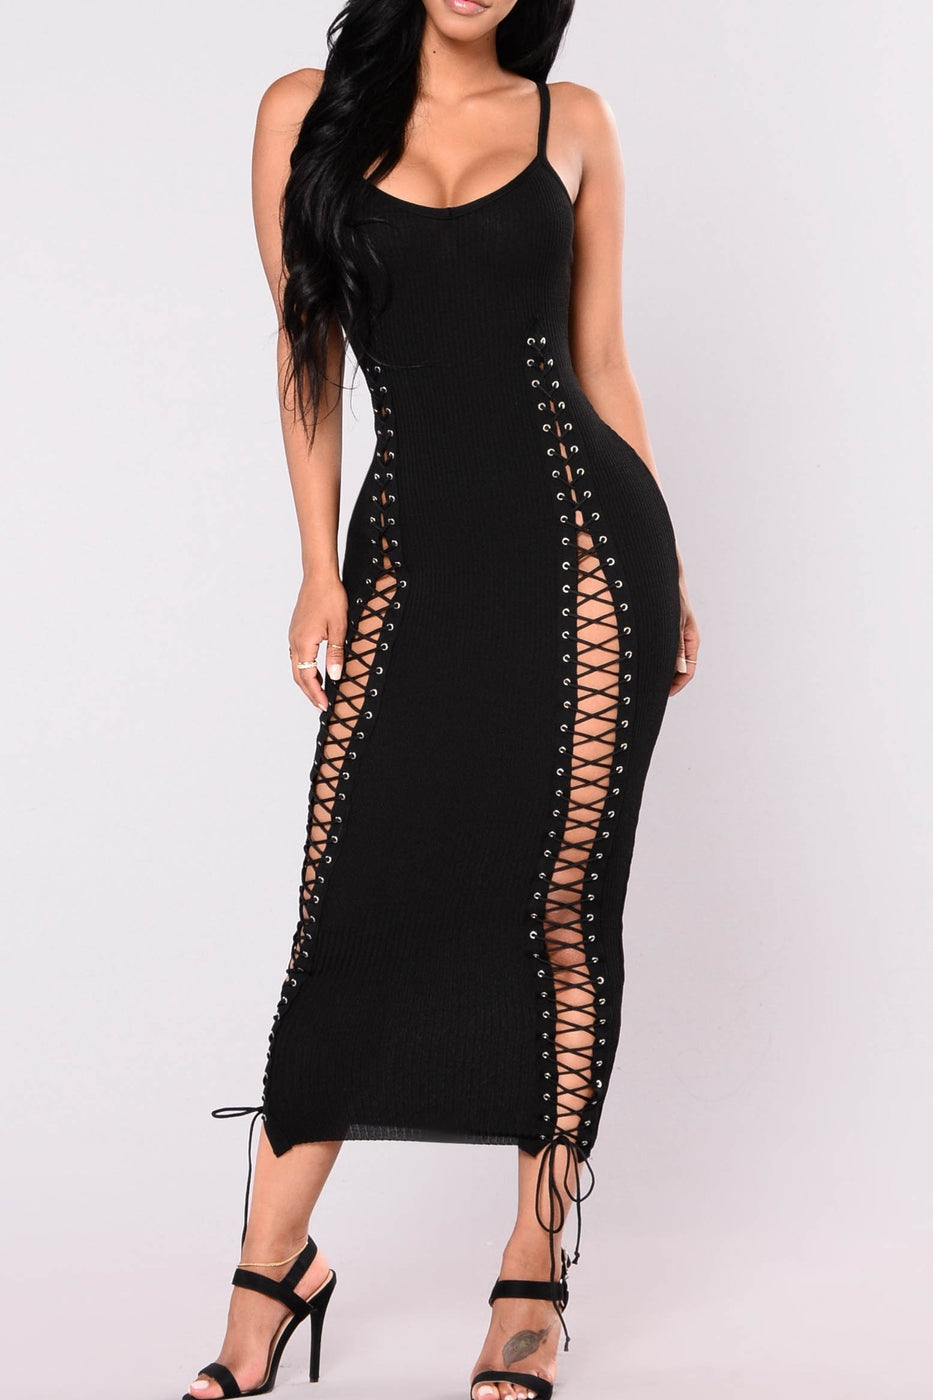 "Laced Up" Maxi Dress